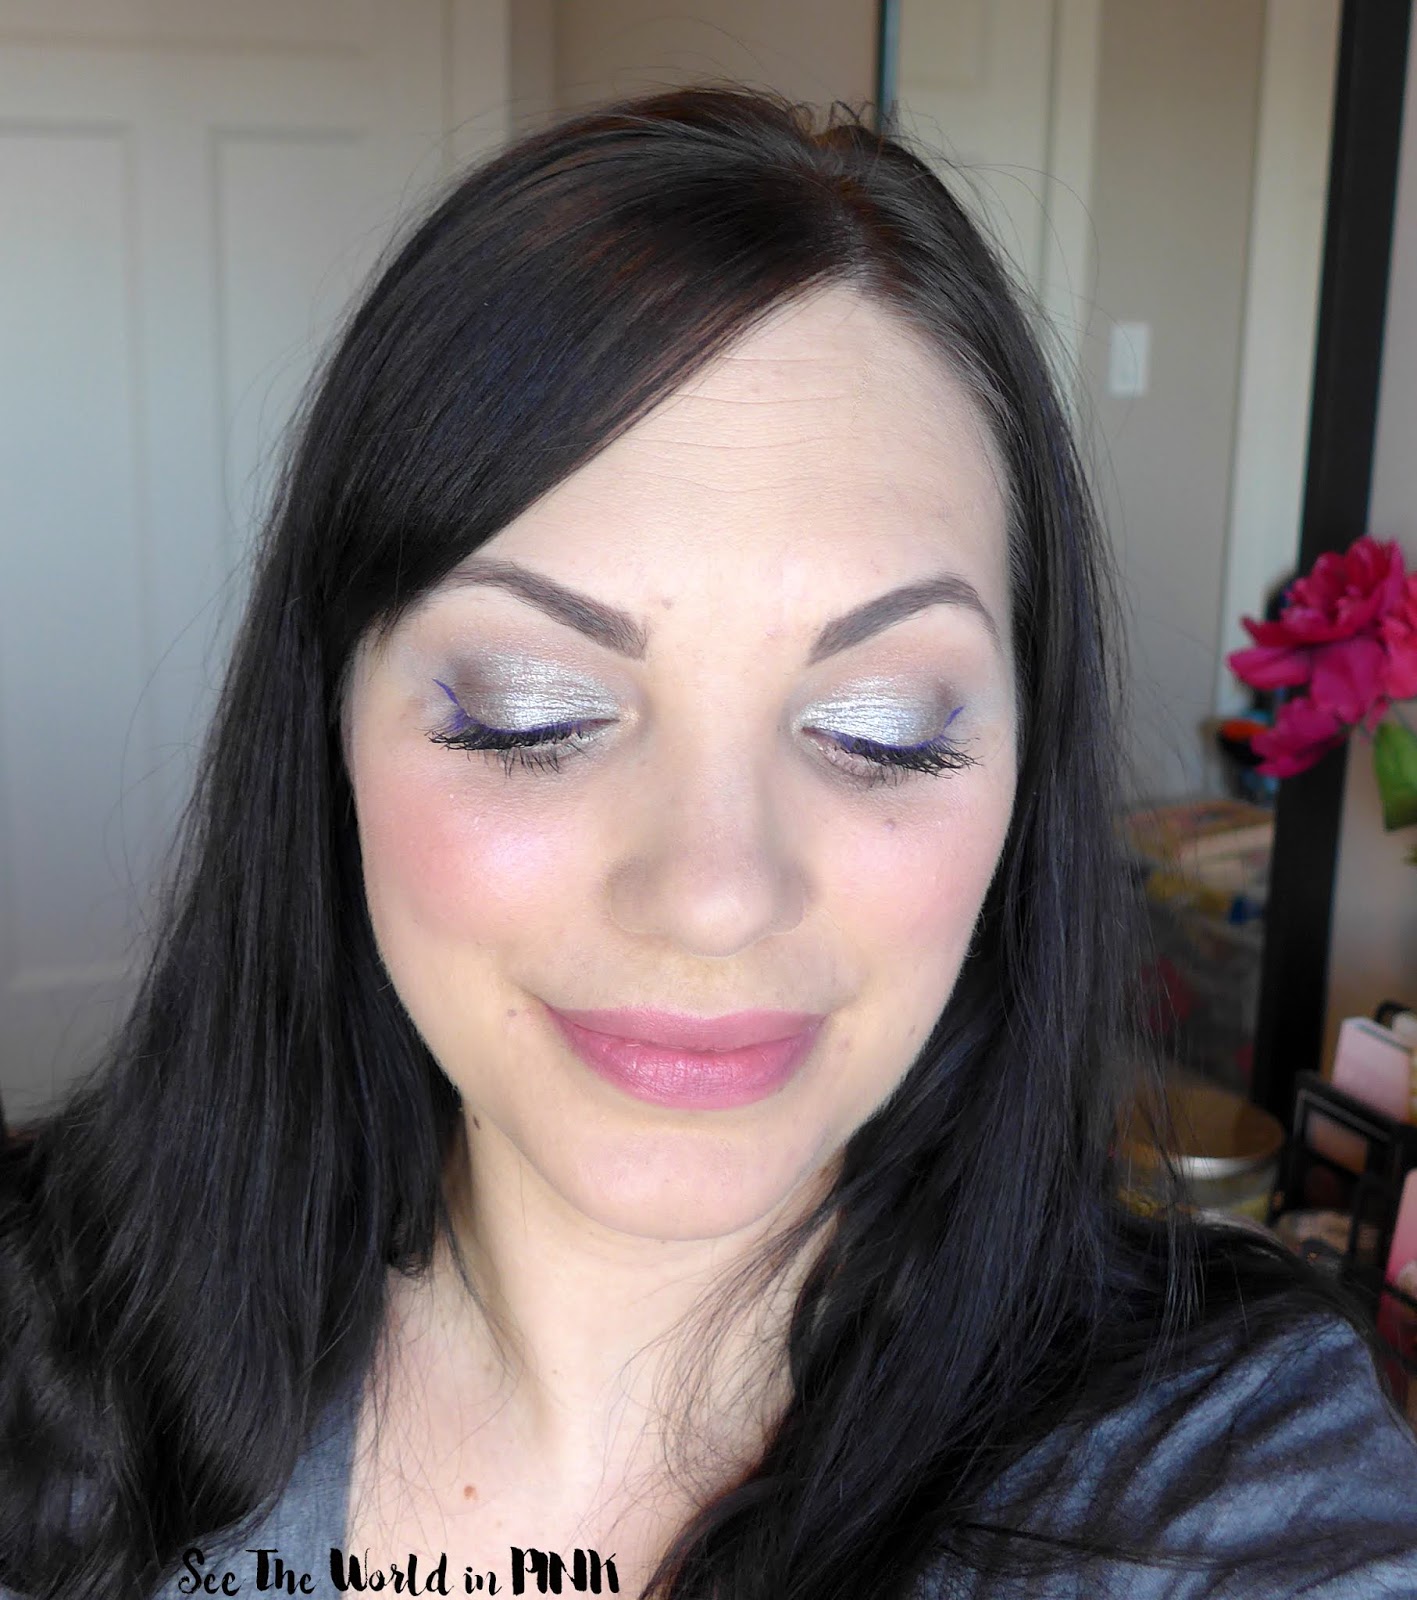 Revlon Mythical Lights Ethereal Makeup Look & Product Swatches